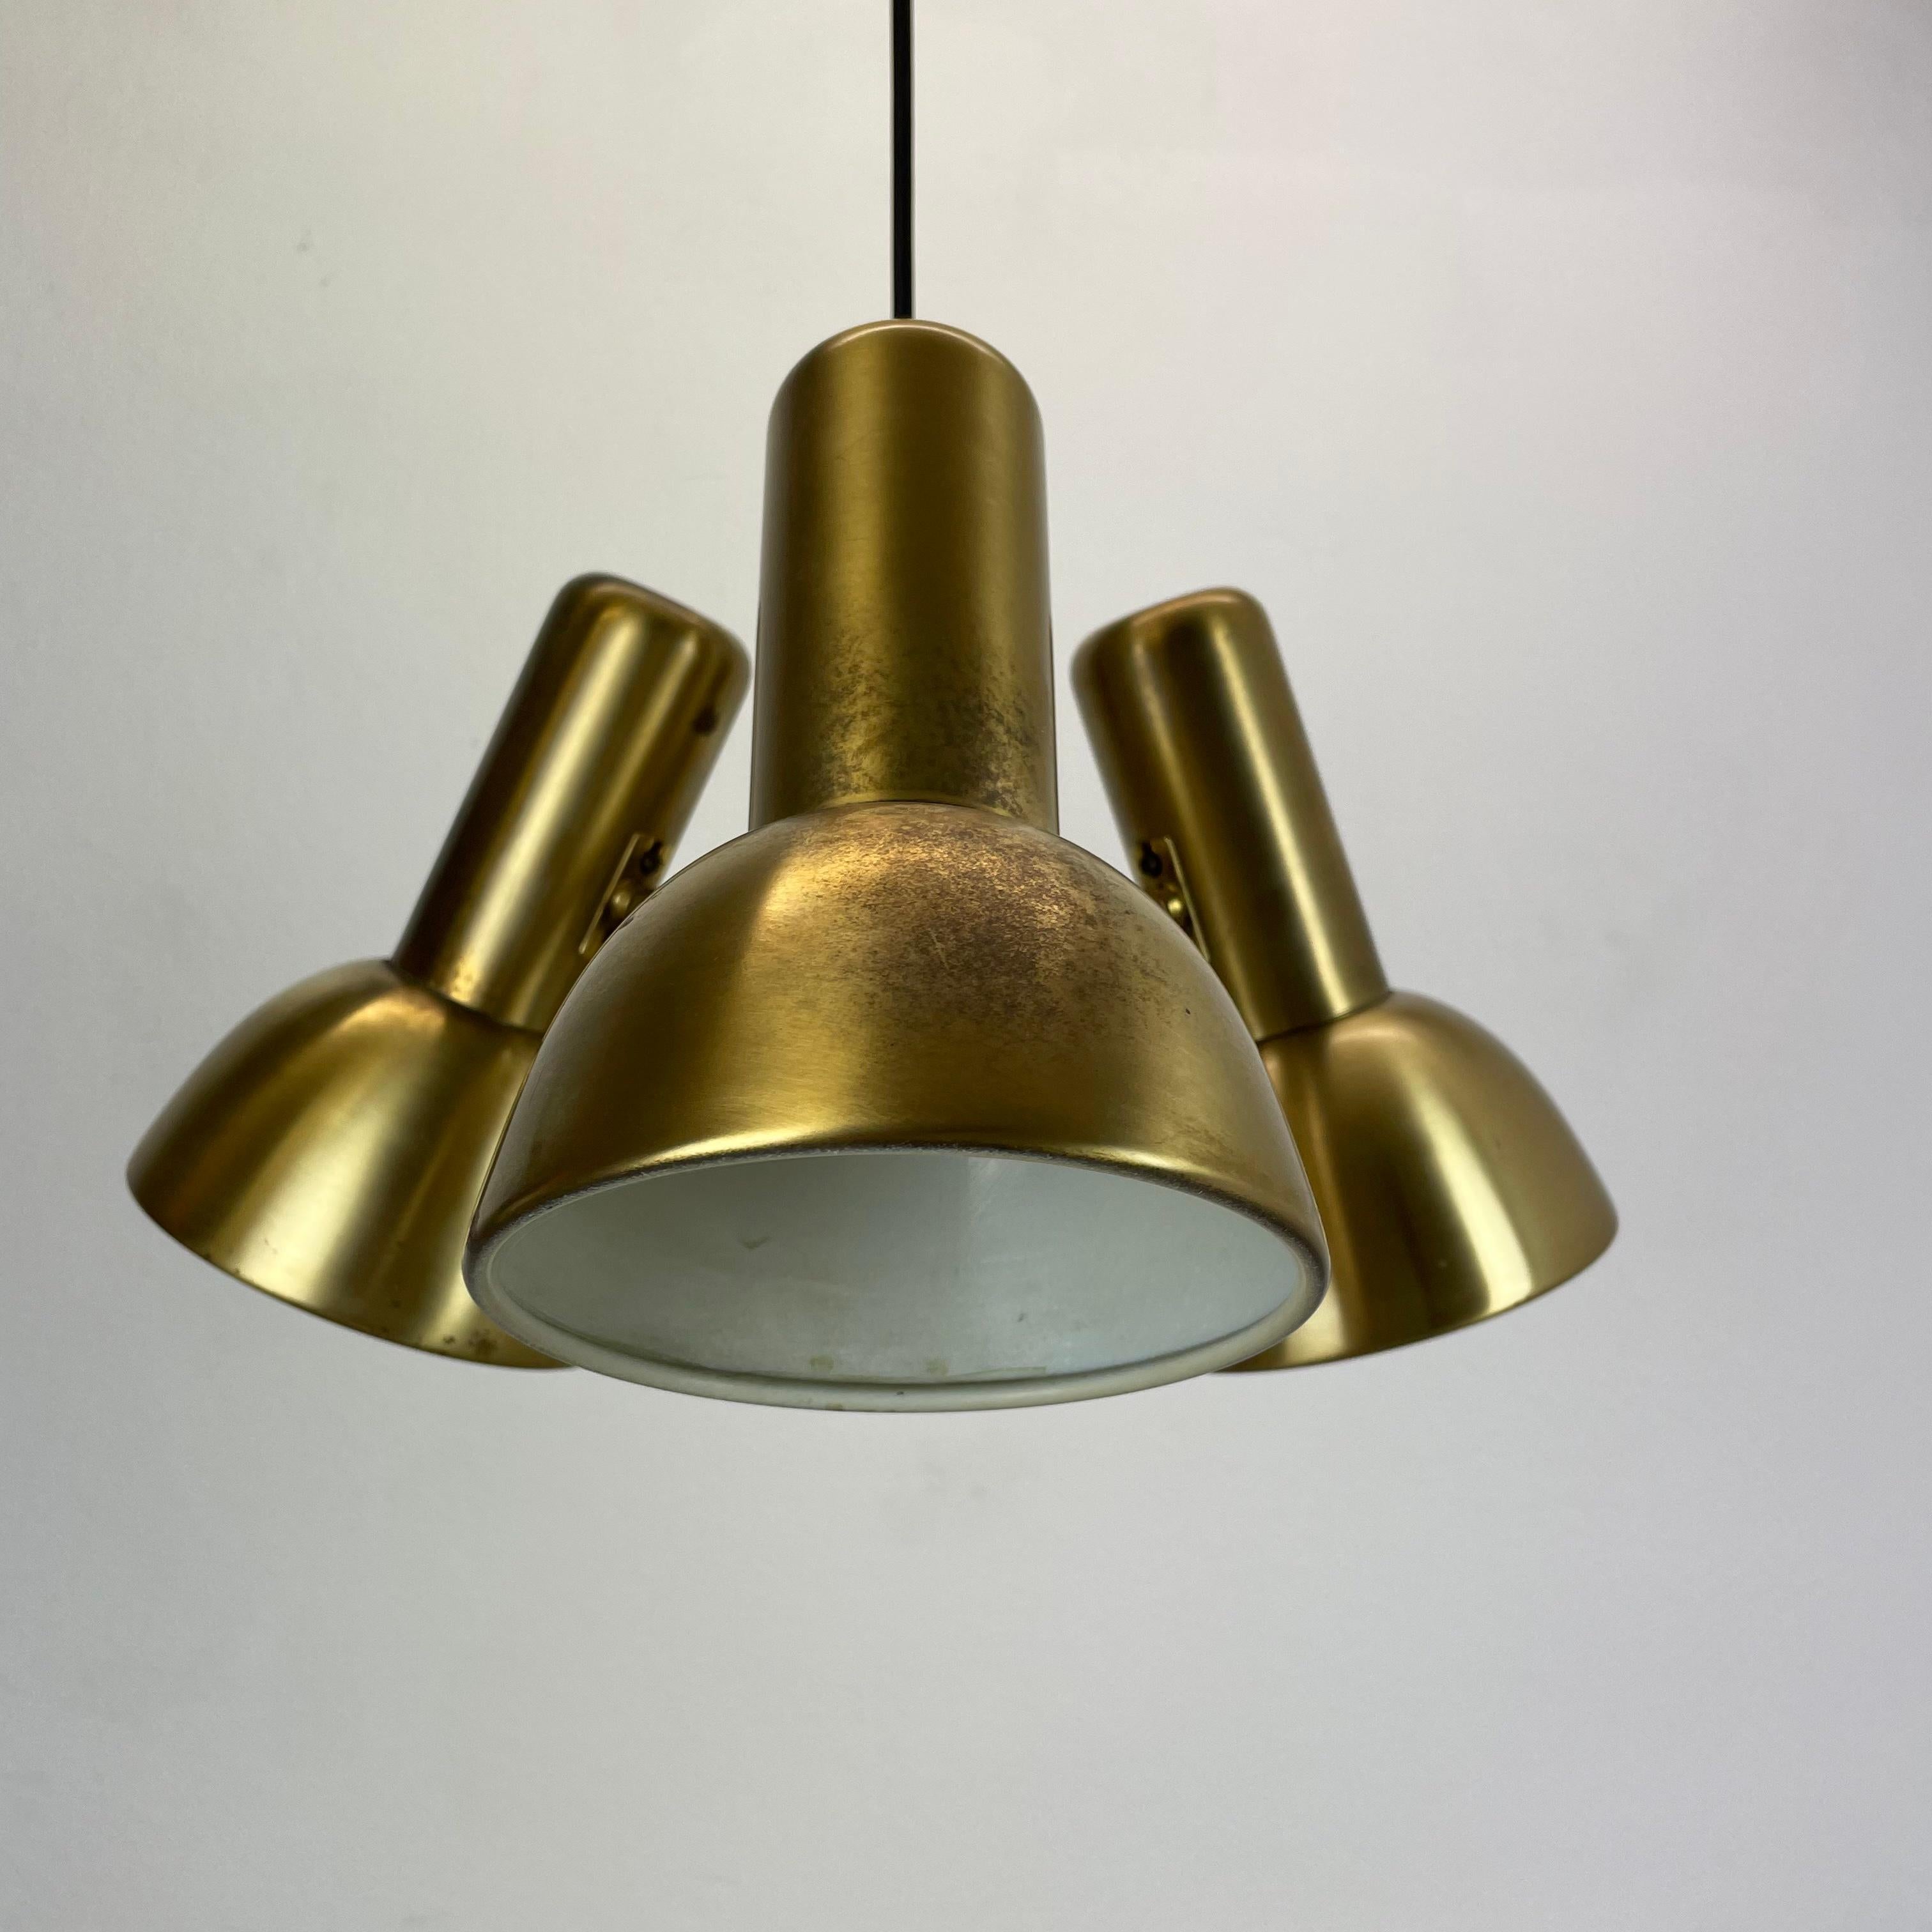 Metal 3-Spot Brass Tone Hanging Light Koch and Lowy Style OMI Lighting, Germany, 1970 For Sale